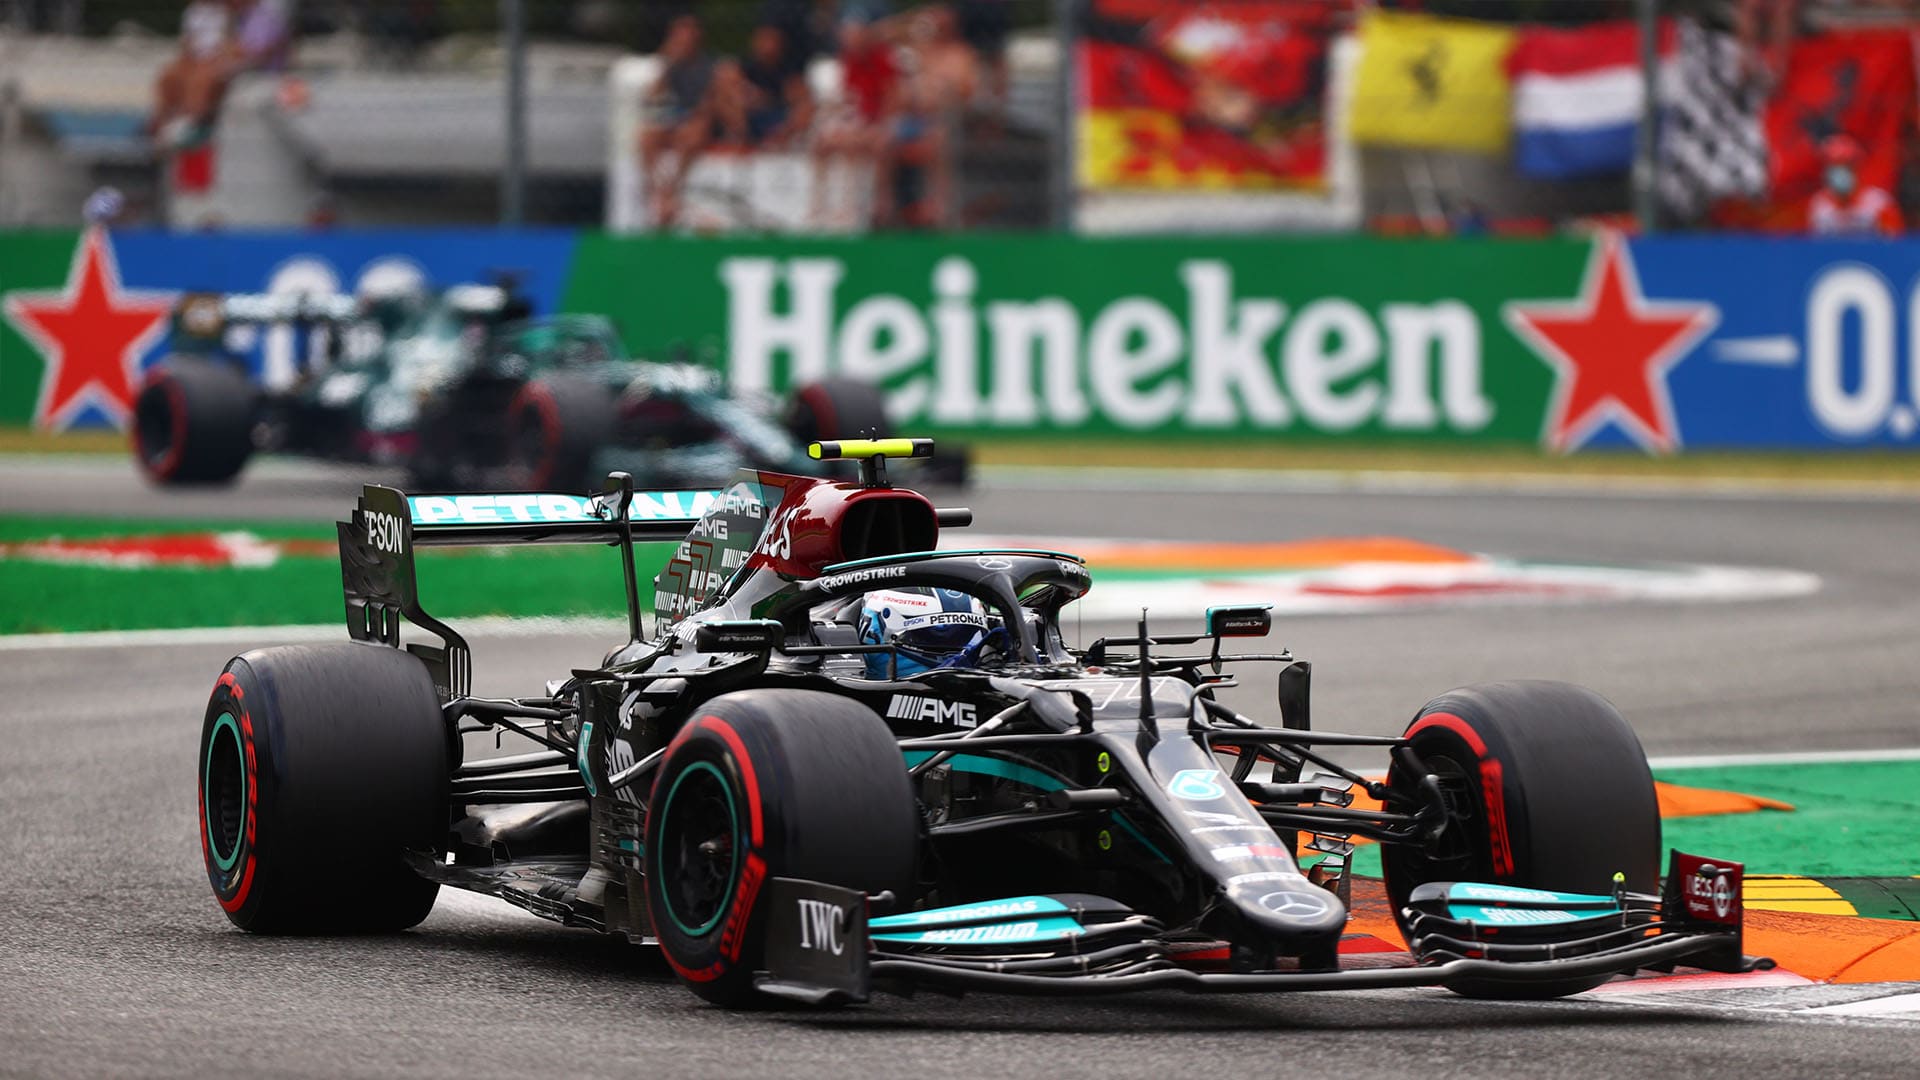 2021 Italian Grand Prix qualifying report and highlights Bottas beats Hamilton at Monza to claim top grid slot for F1 Sprint Formula 1®